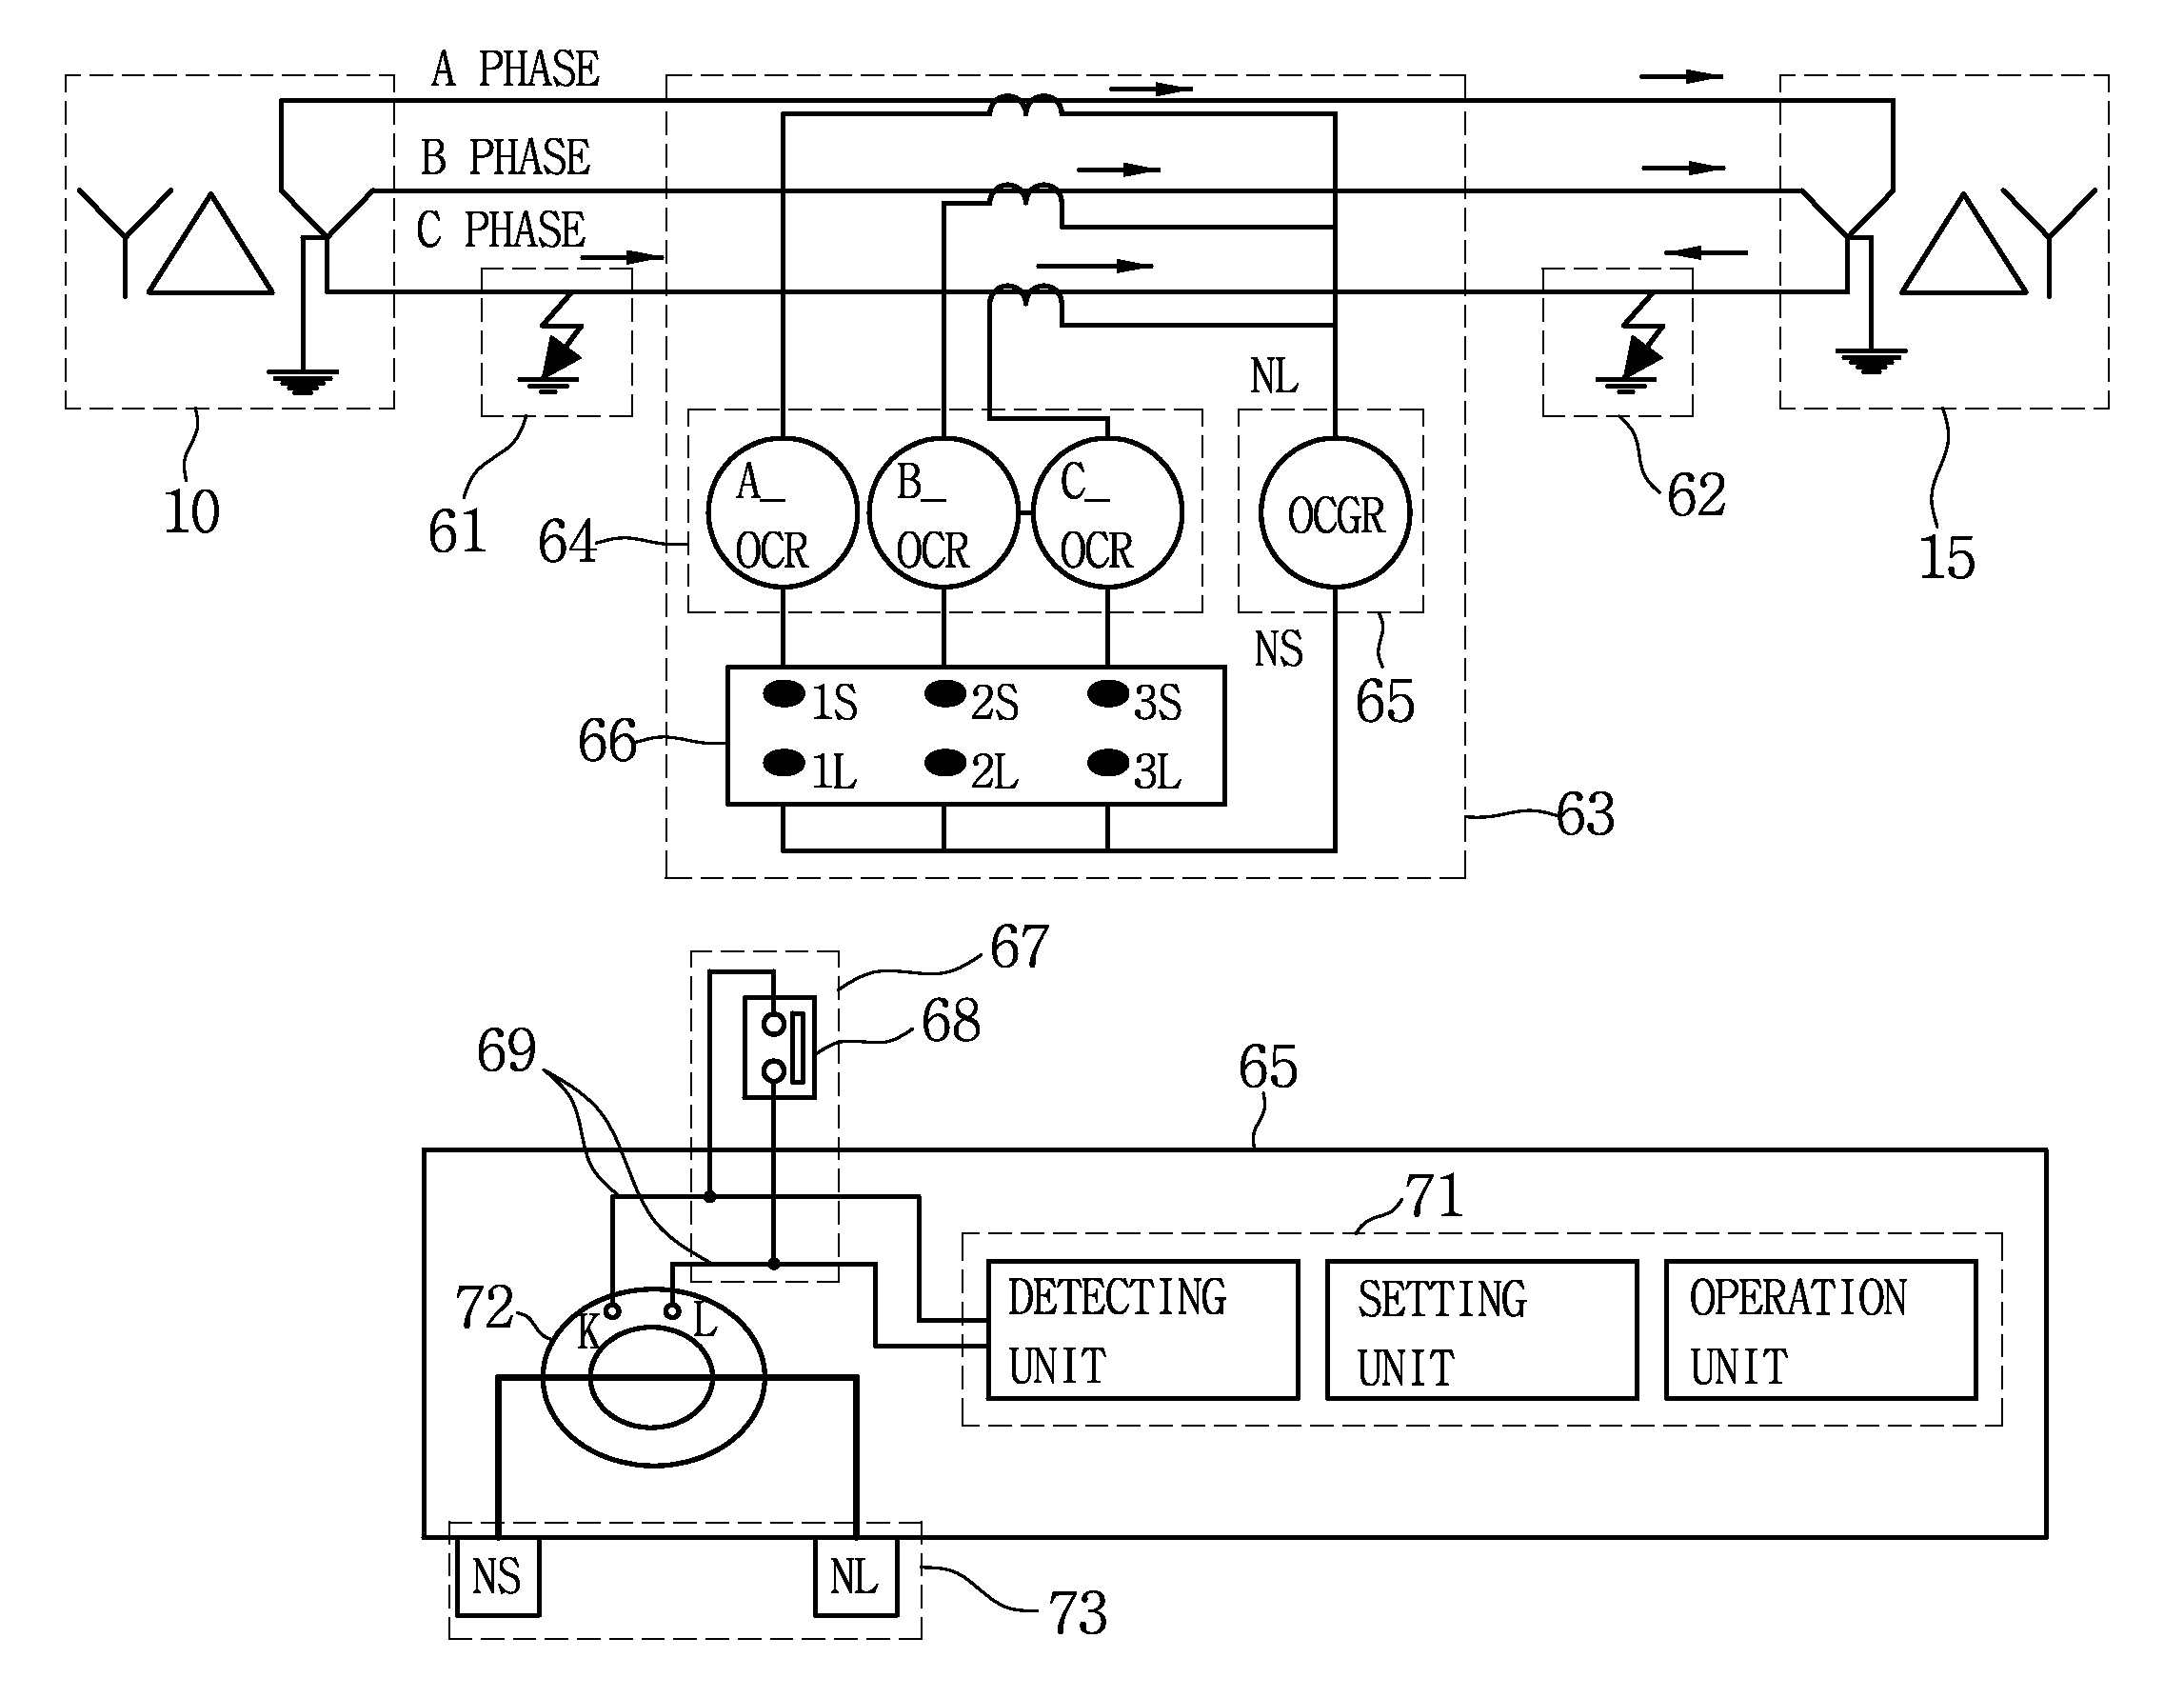 Apparatus and method for preventing reverse power flow of over current relay